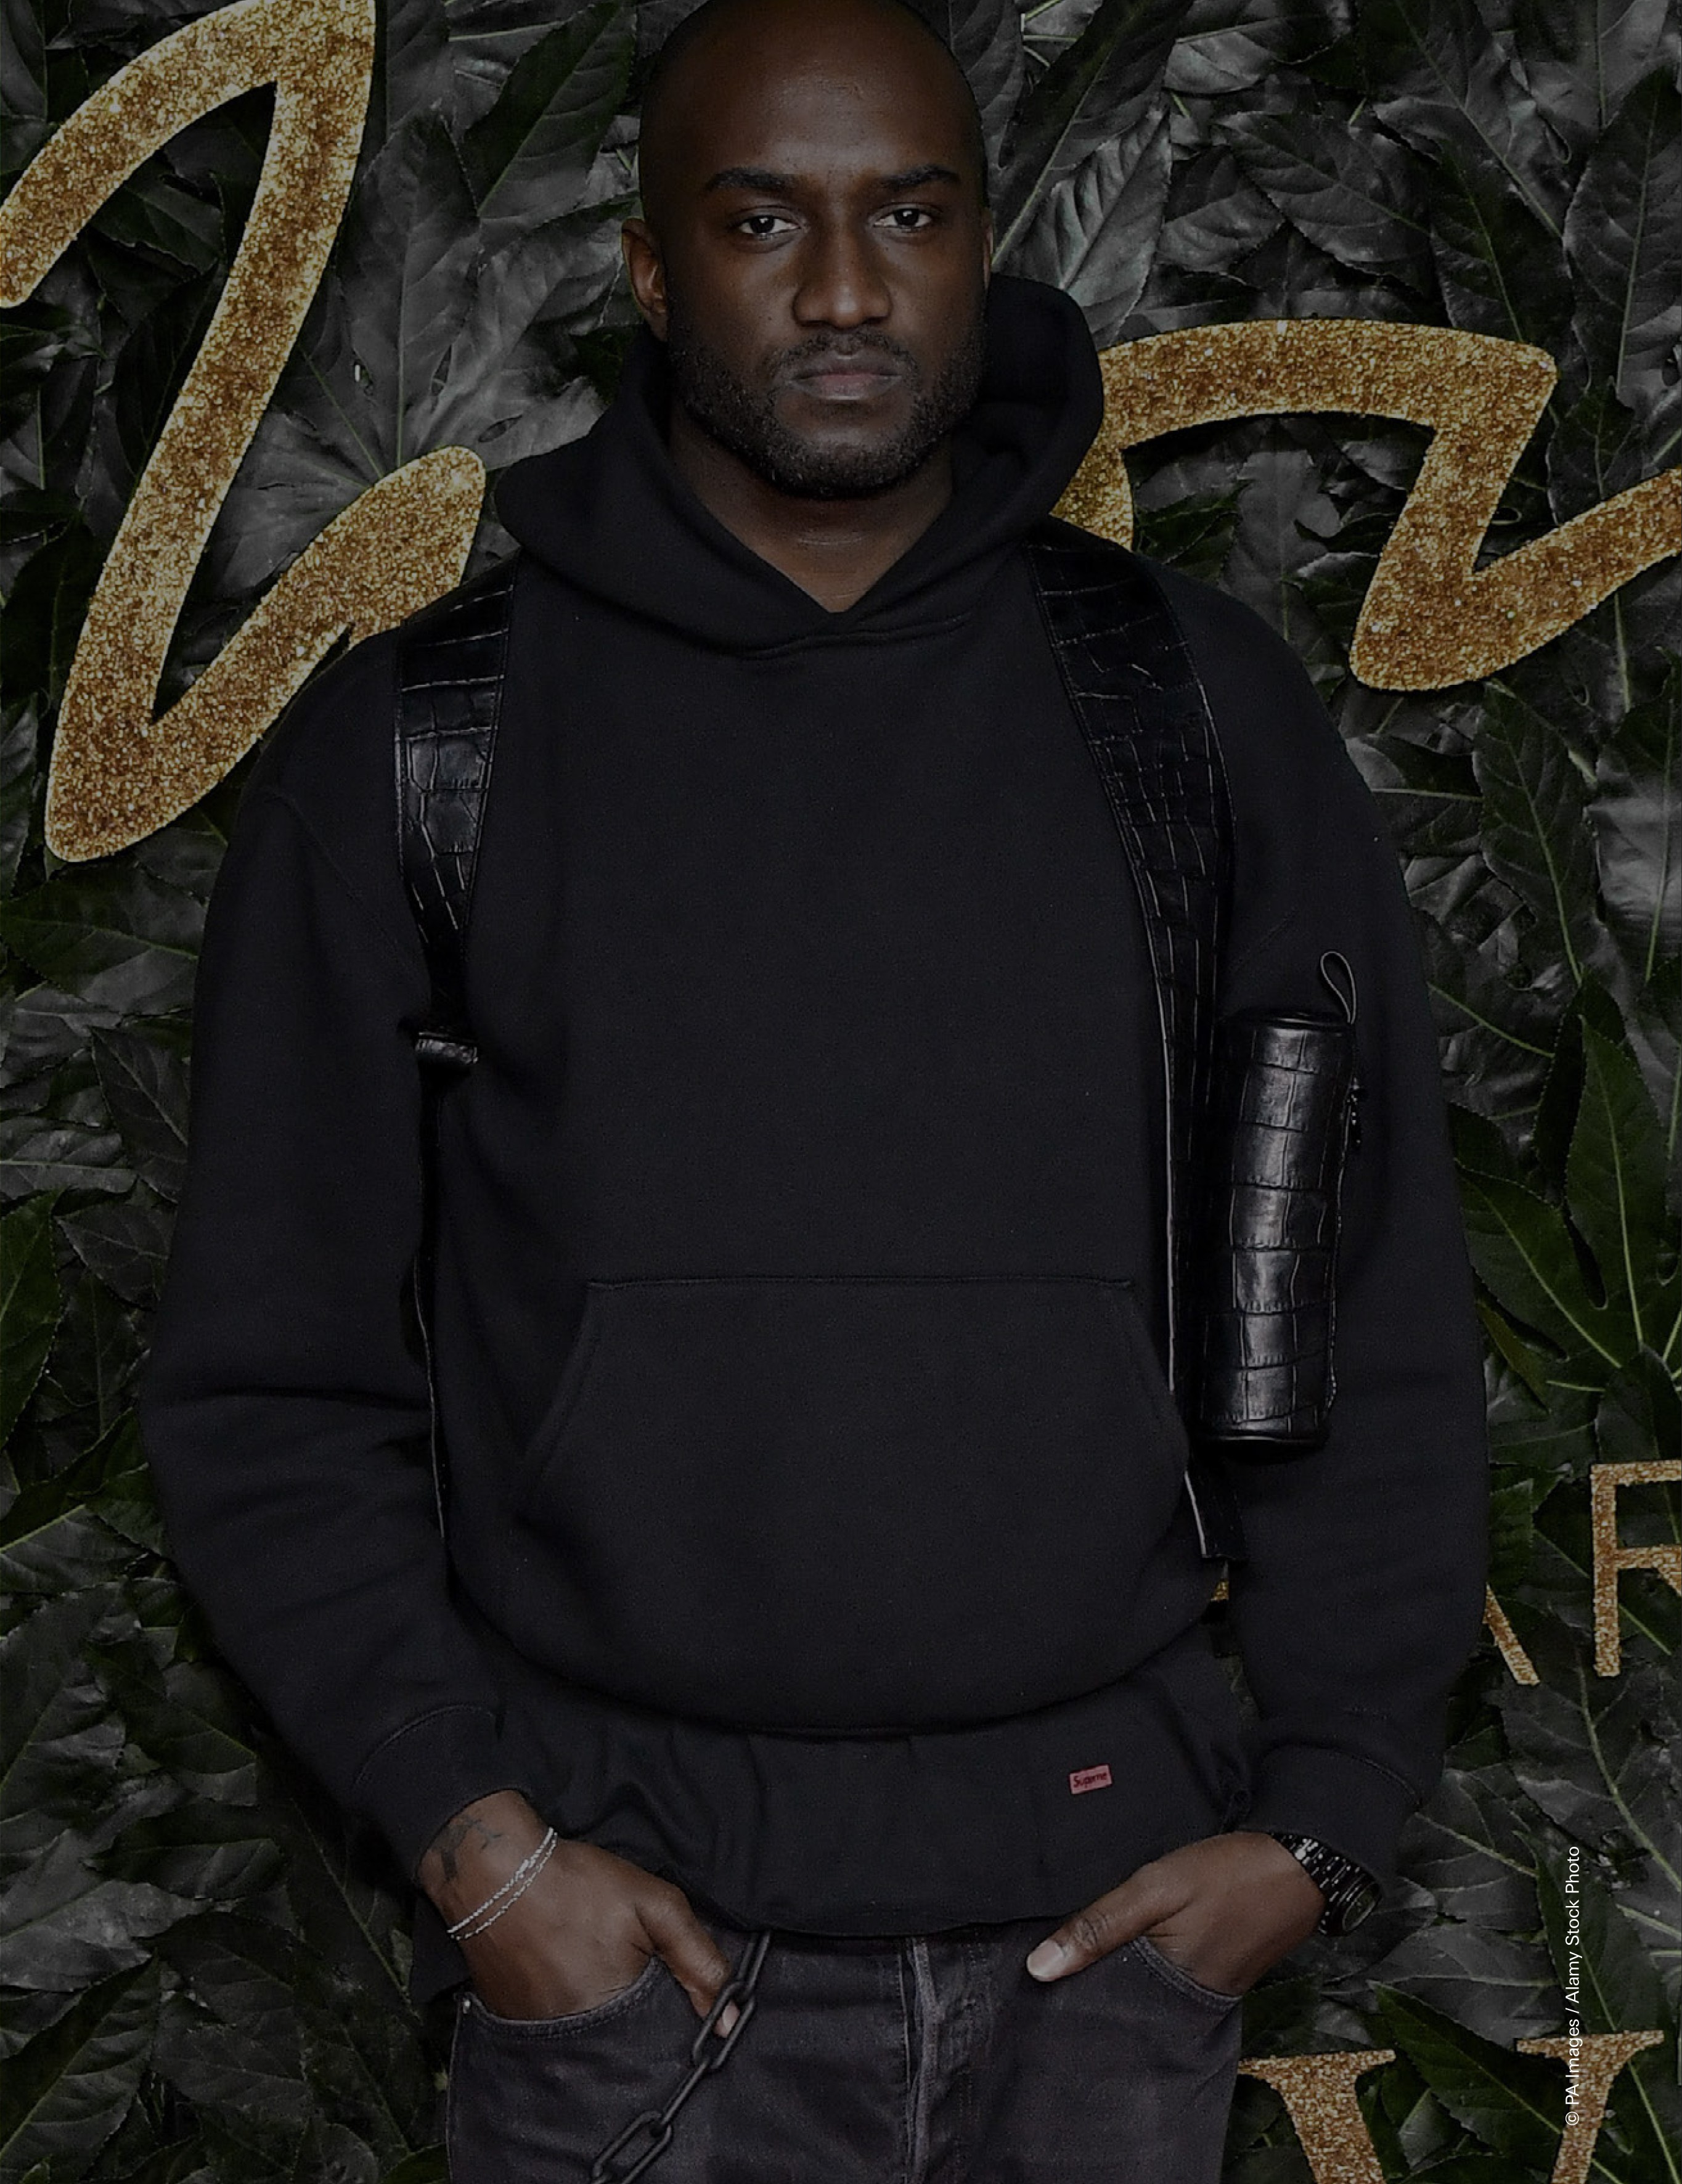 What will be the future of Off-White™ without Virgil Abloh?